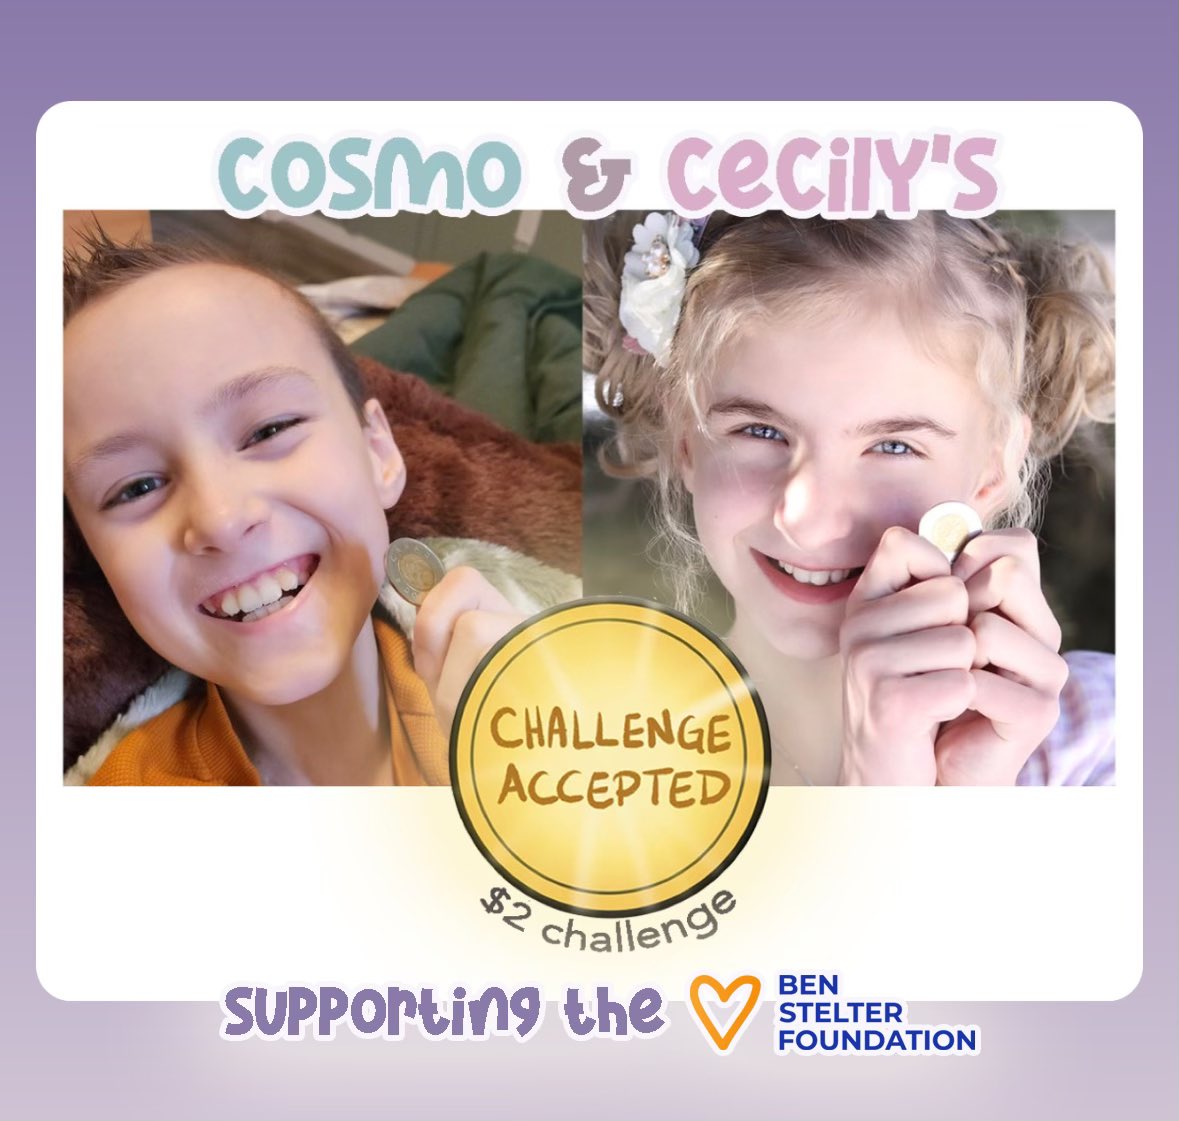 It’s Childhood Cancer Day, and me and my best friend and fellow brain cancer warrior Cosmo started a $2 challenge with our tooth fairy money, hoping to bring love to fellow kids like us with cancer through the @BenStelterFund. benstelterfoundation.crowdchange.ca/54581